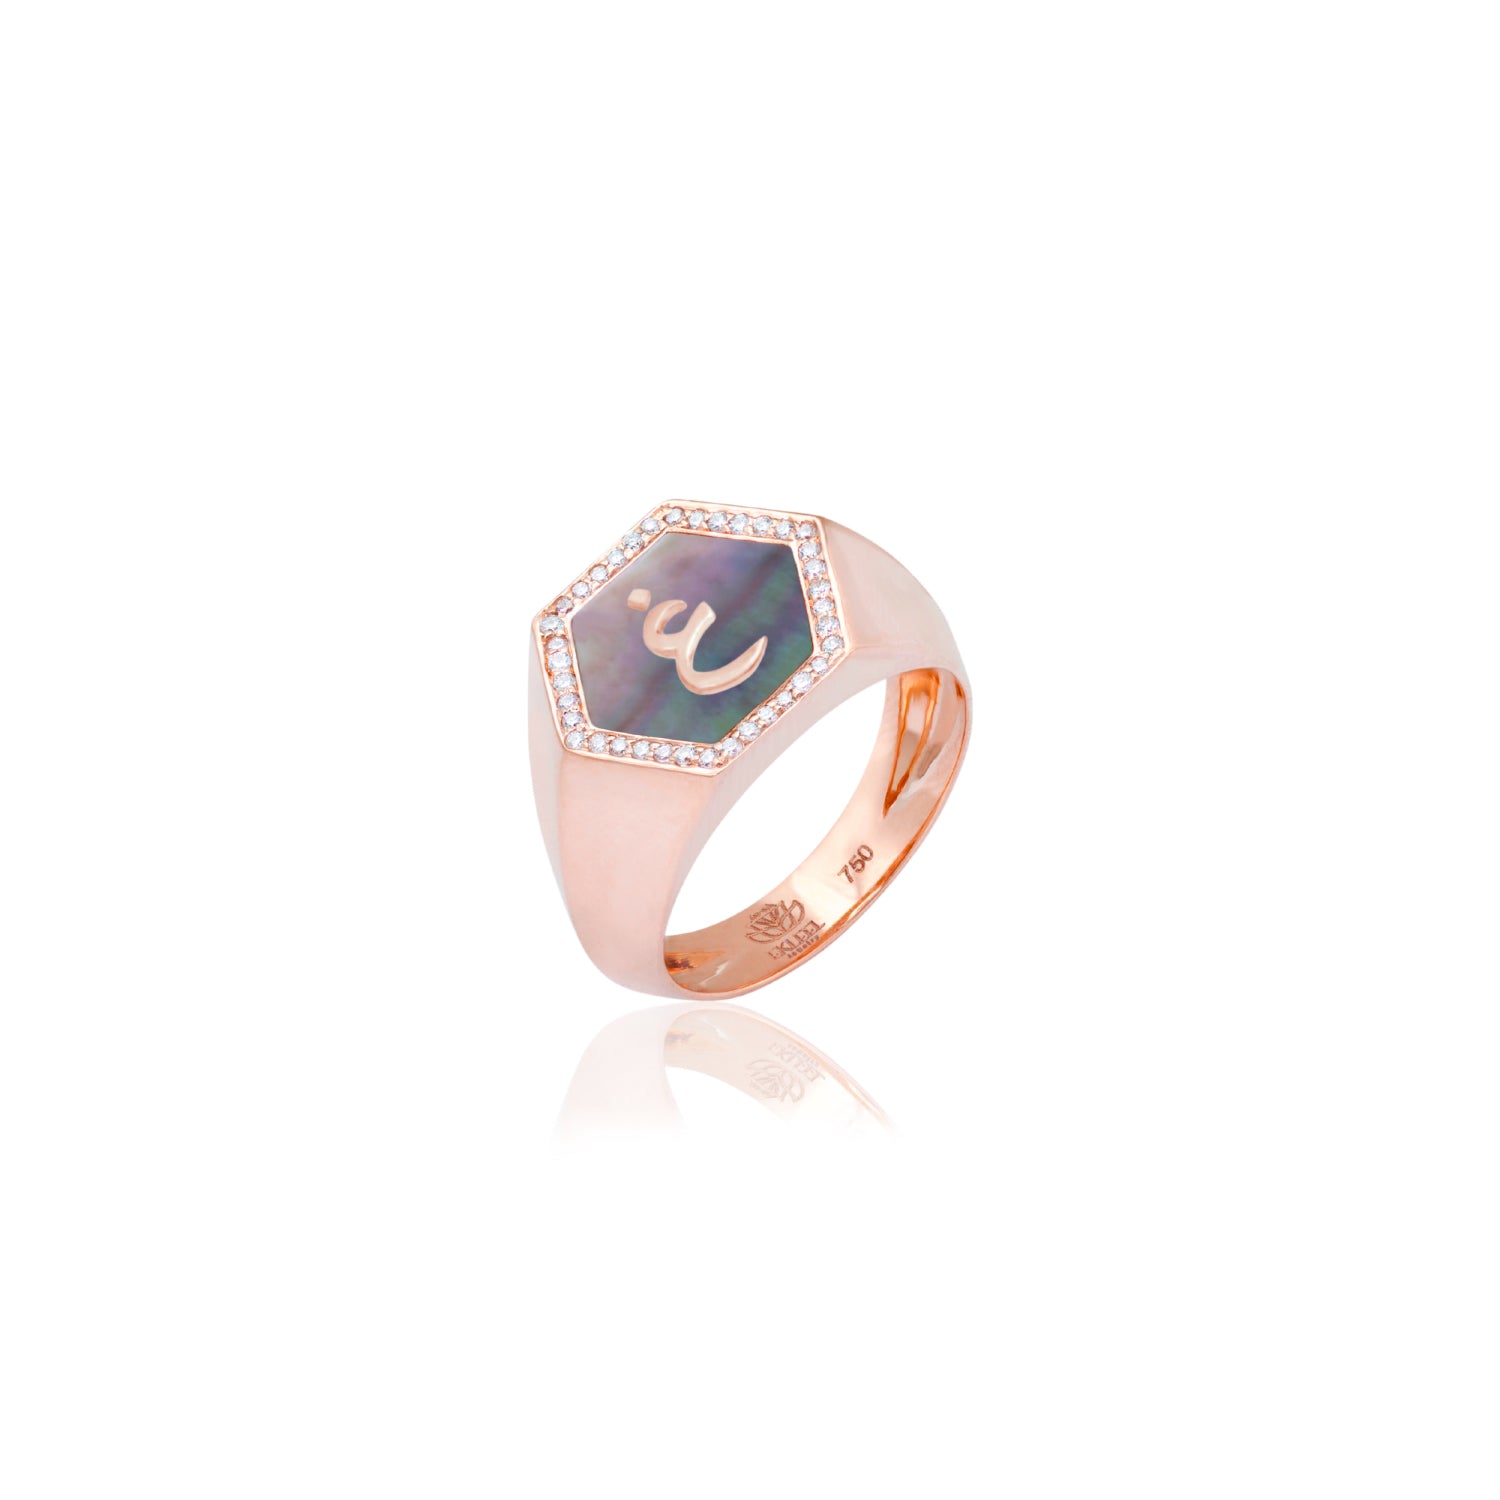 Qamoos 2.0 Letter غ Black Mother of Pearl and Diamond Signet Ring in Rose Gold